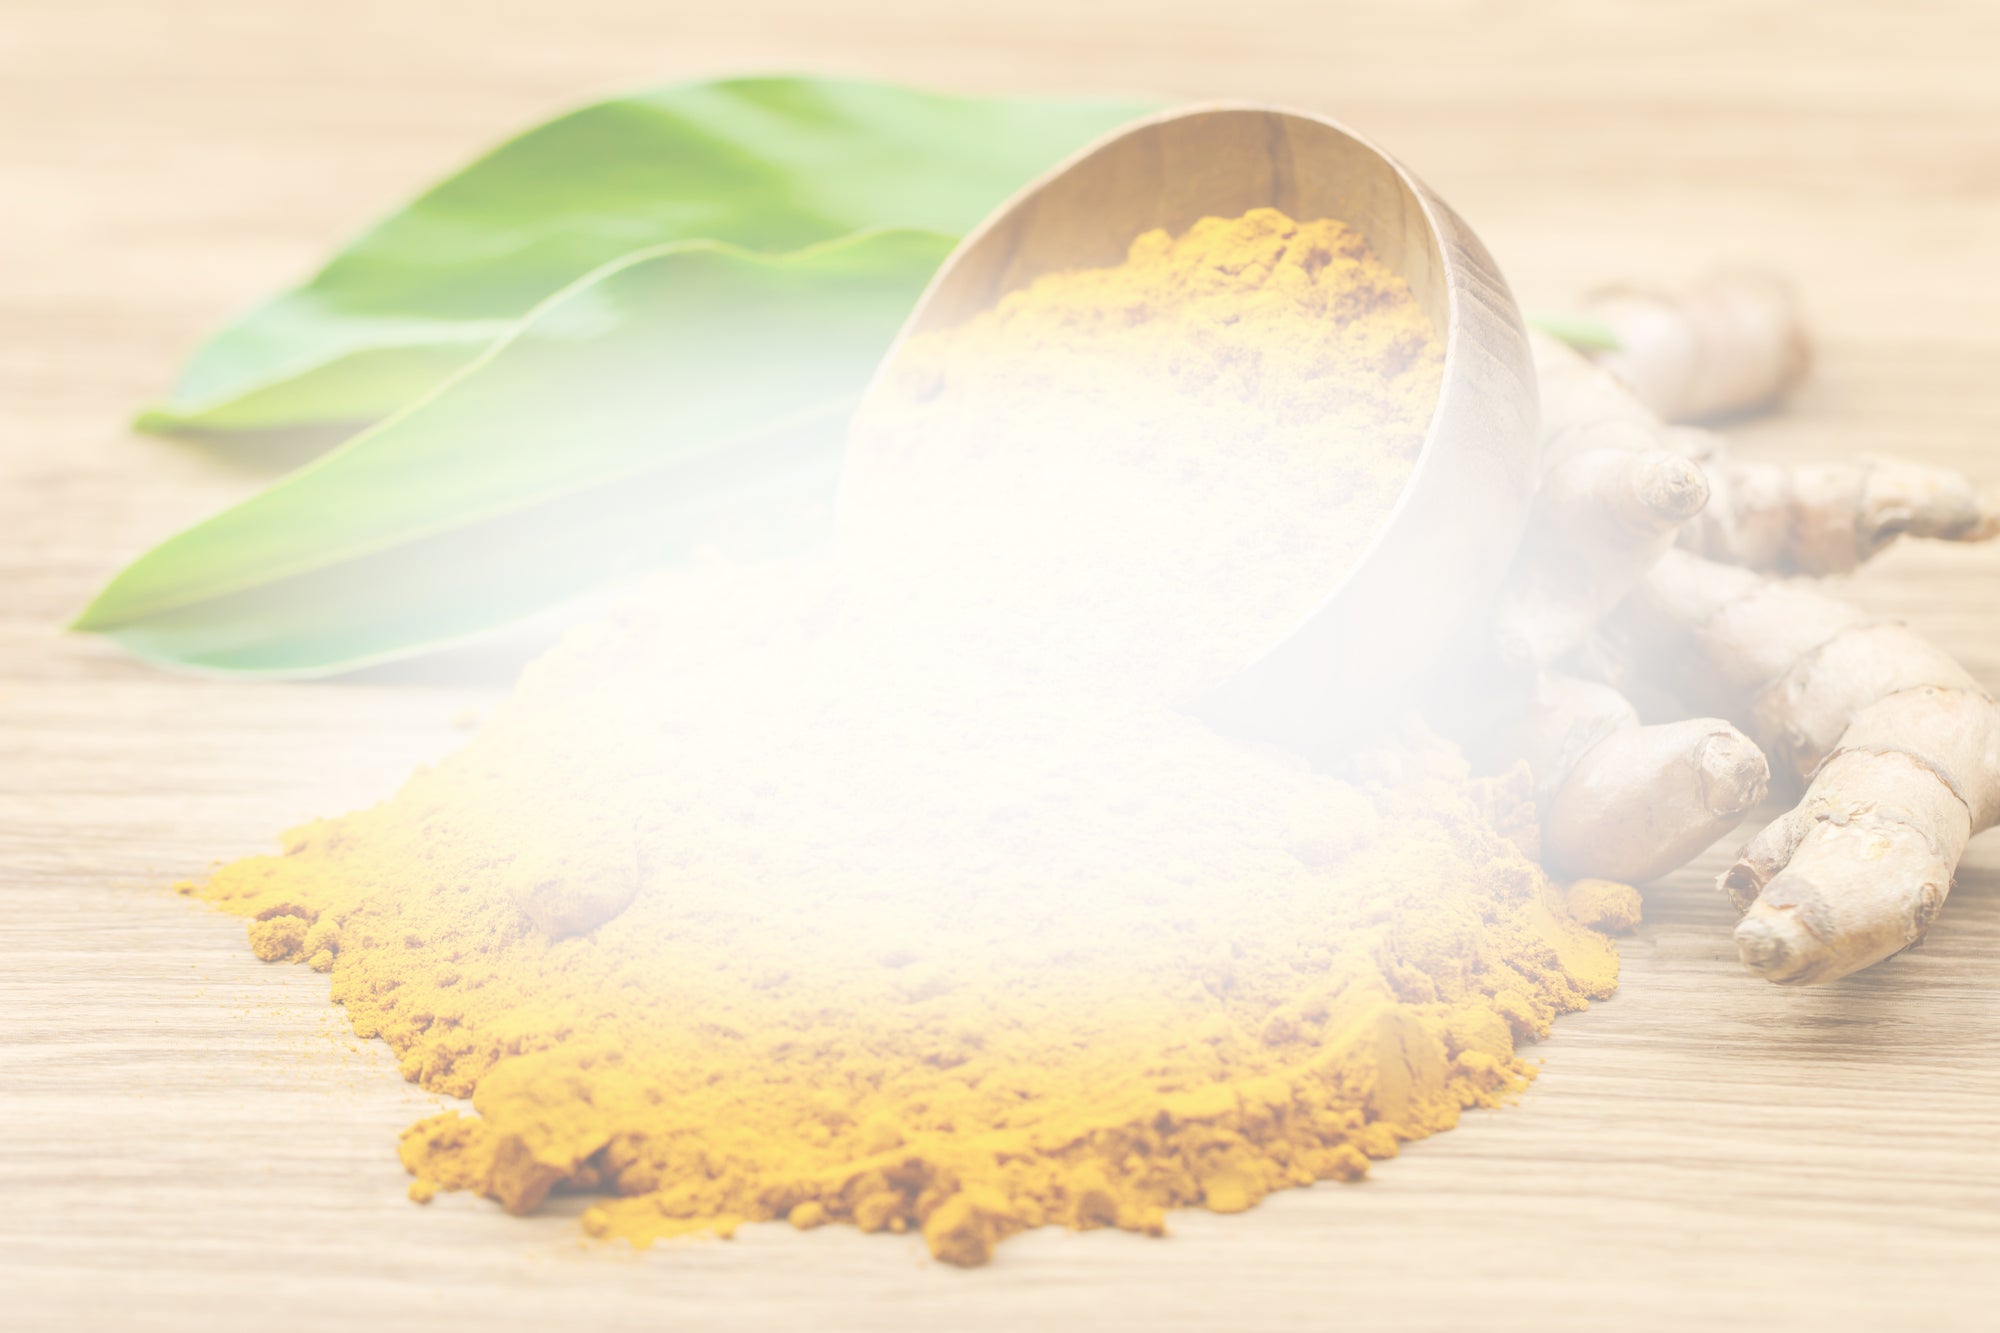 Turmeric vs. Curcumin: Are They the Same Thing or Different?